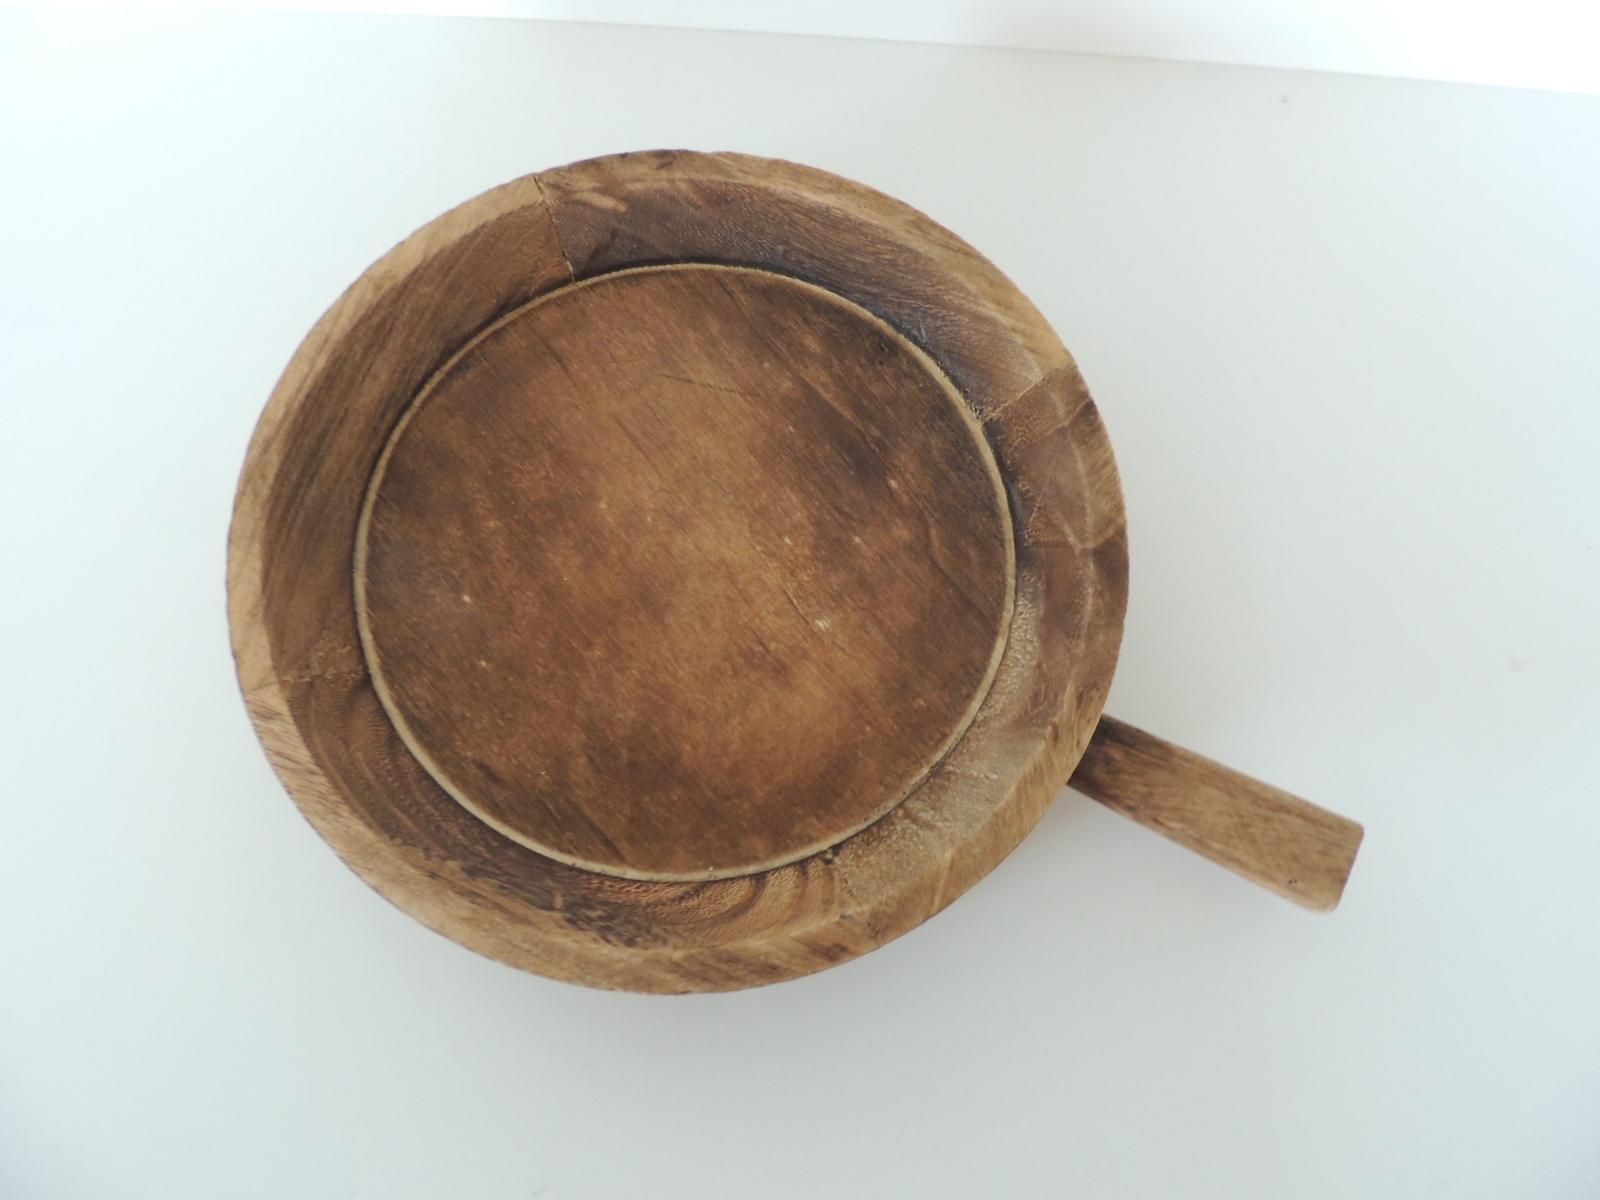 Round wooden artisanal bowl with handle.
Size: 9